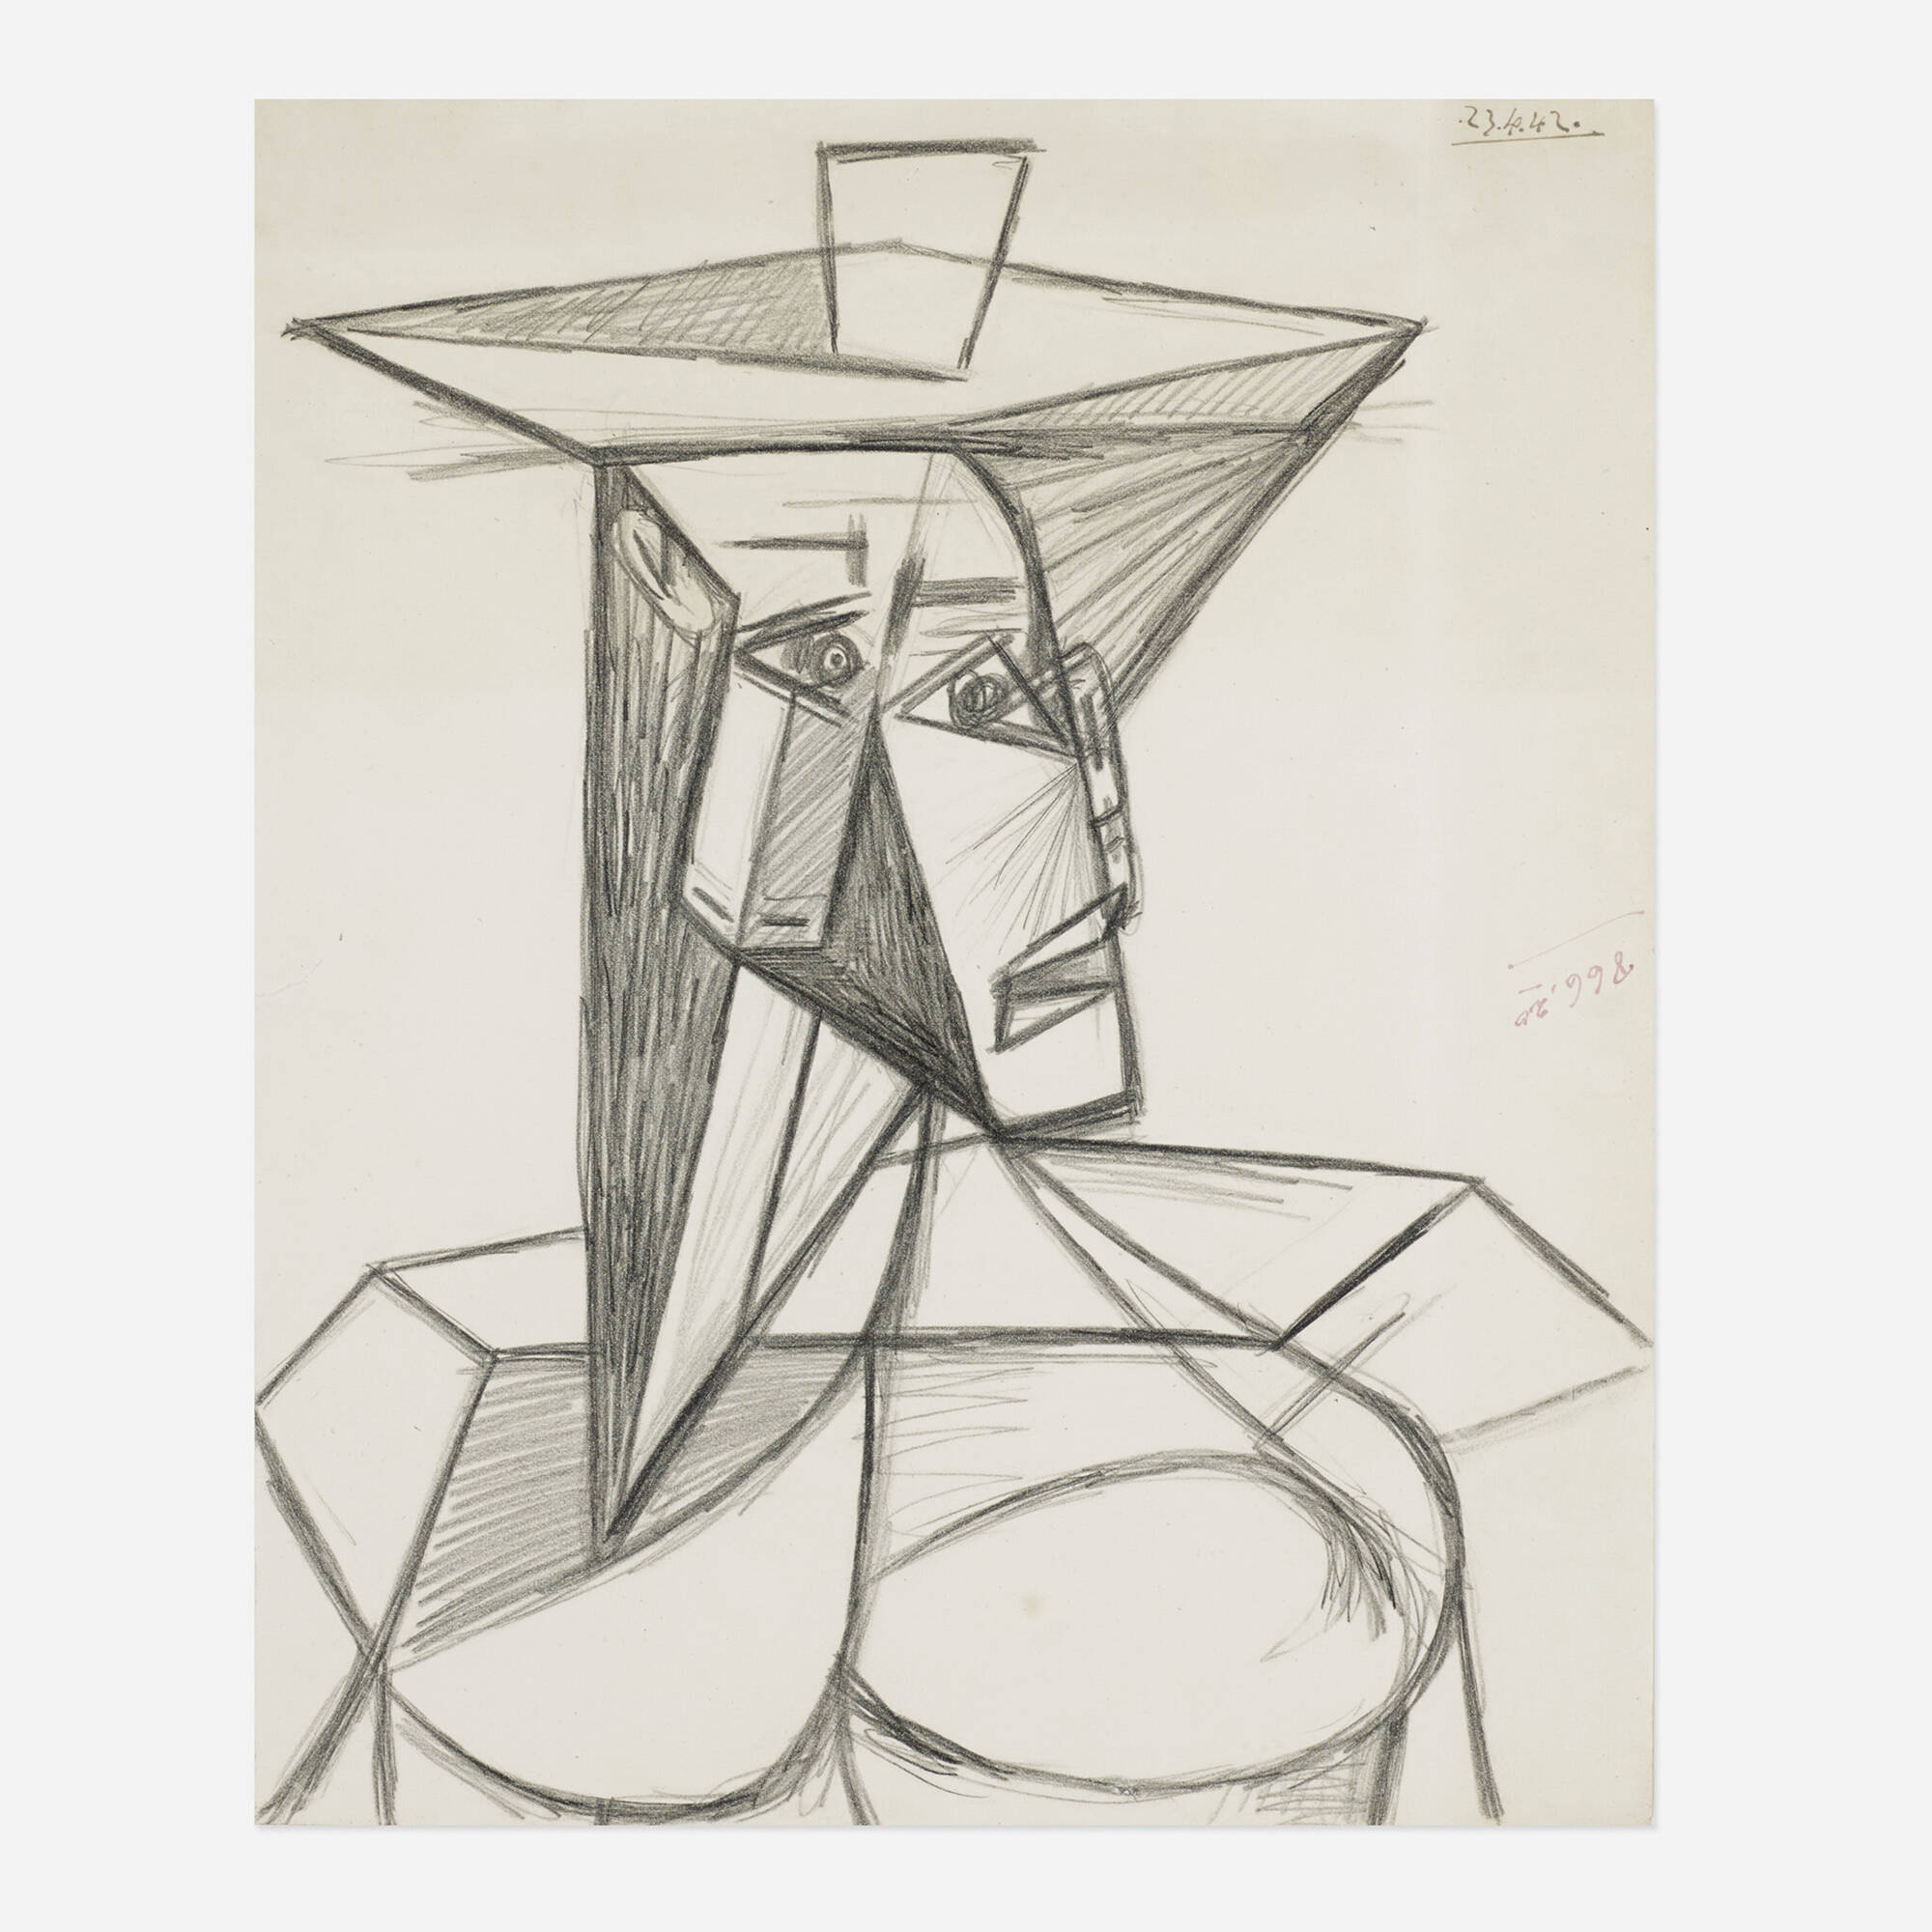 https://www.wright20.com/items/index/2000/5_1_pablo_picasso_master_drawings_april_2013_pablo_picasso_buste_de_femme__wright_auction.jpg?t=1687362157